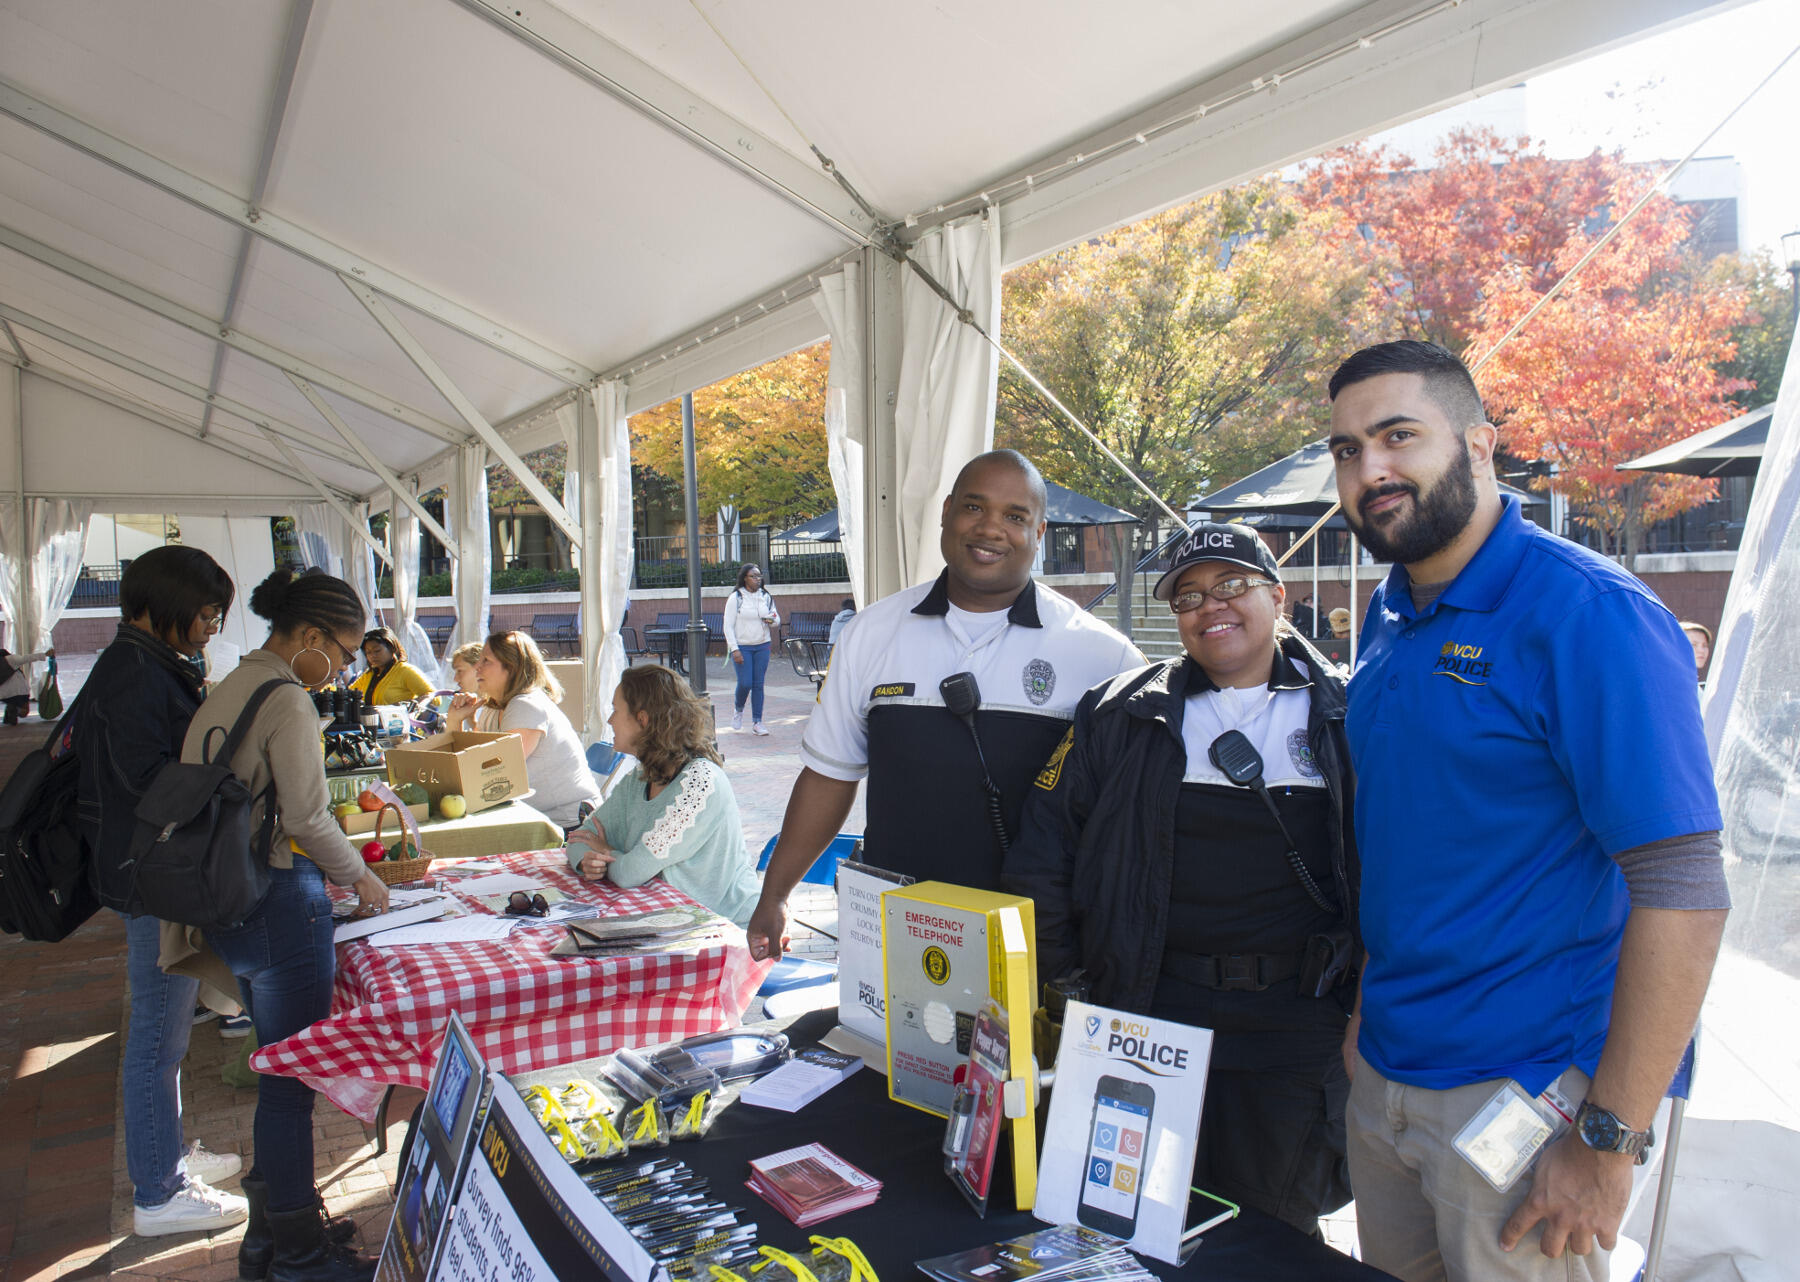 VCU Police at Campus Sustainability Day 2015.